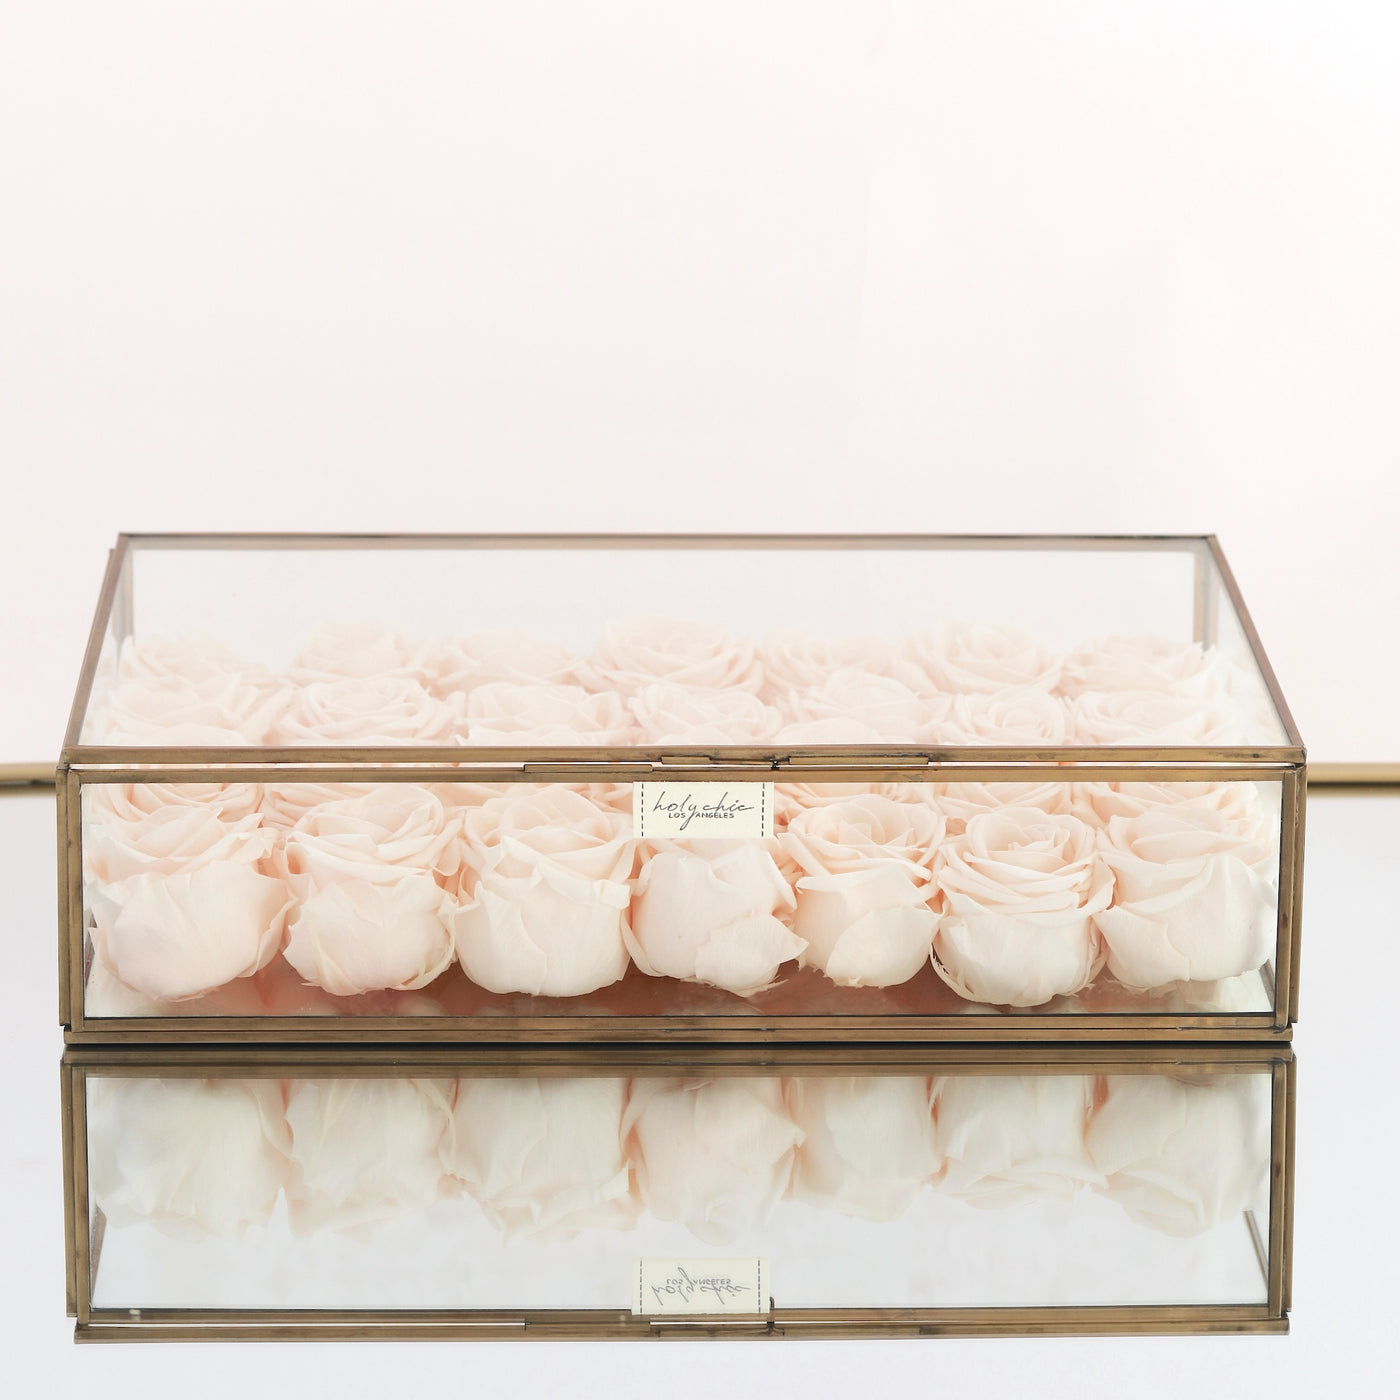 Forever roses in a large clear jewelry glass box